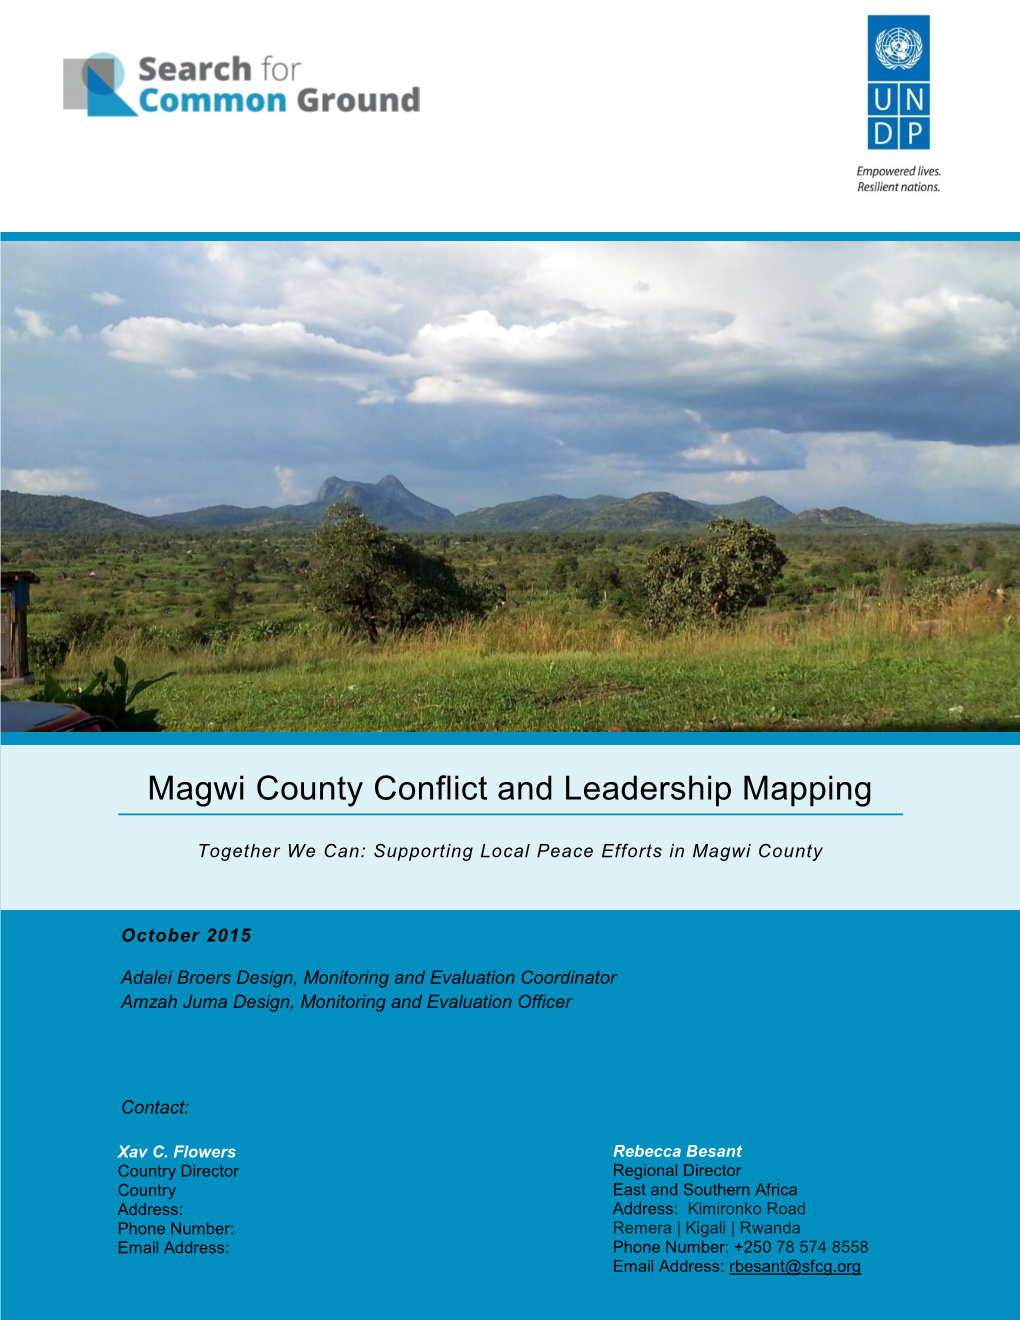 Magwi County Conflict and Leadership Mapping